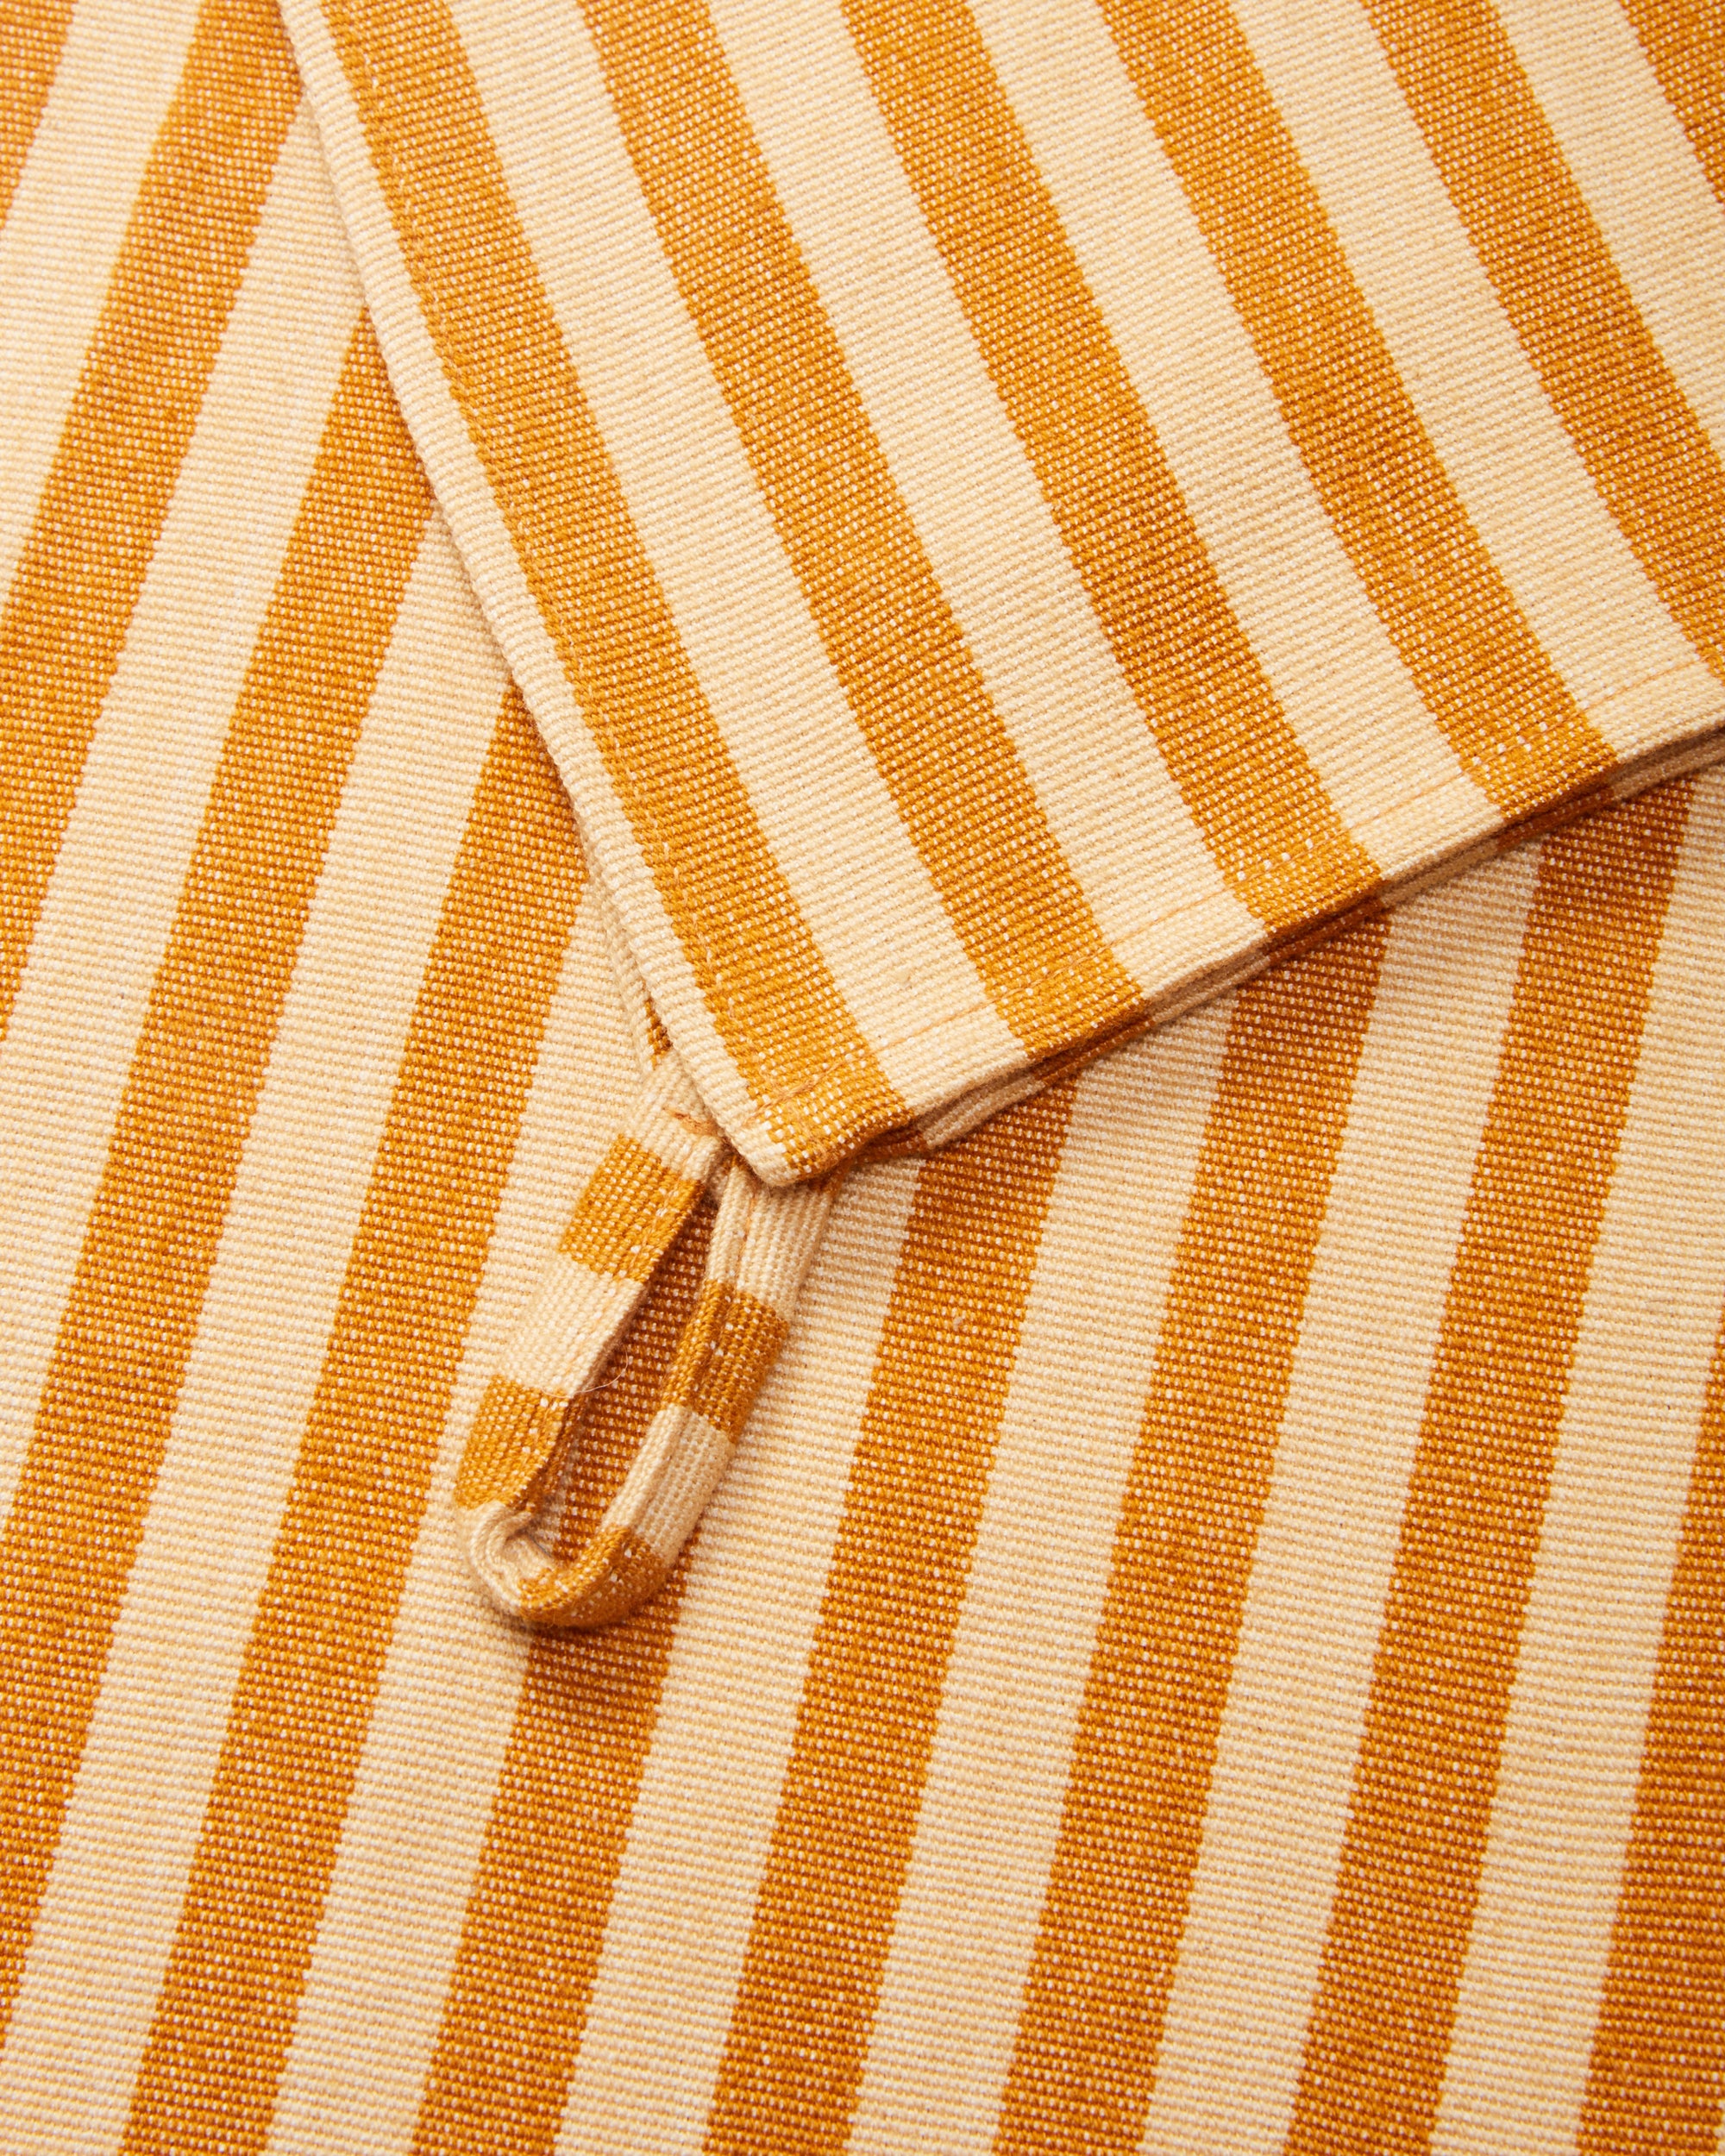 ethically handwoven cotton MINNA sol tea towel, hand towel, kitchen towel, in honey, gold, with hanging loop